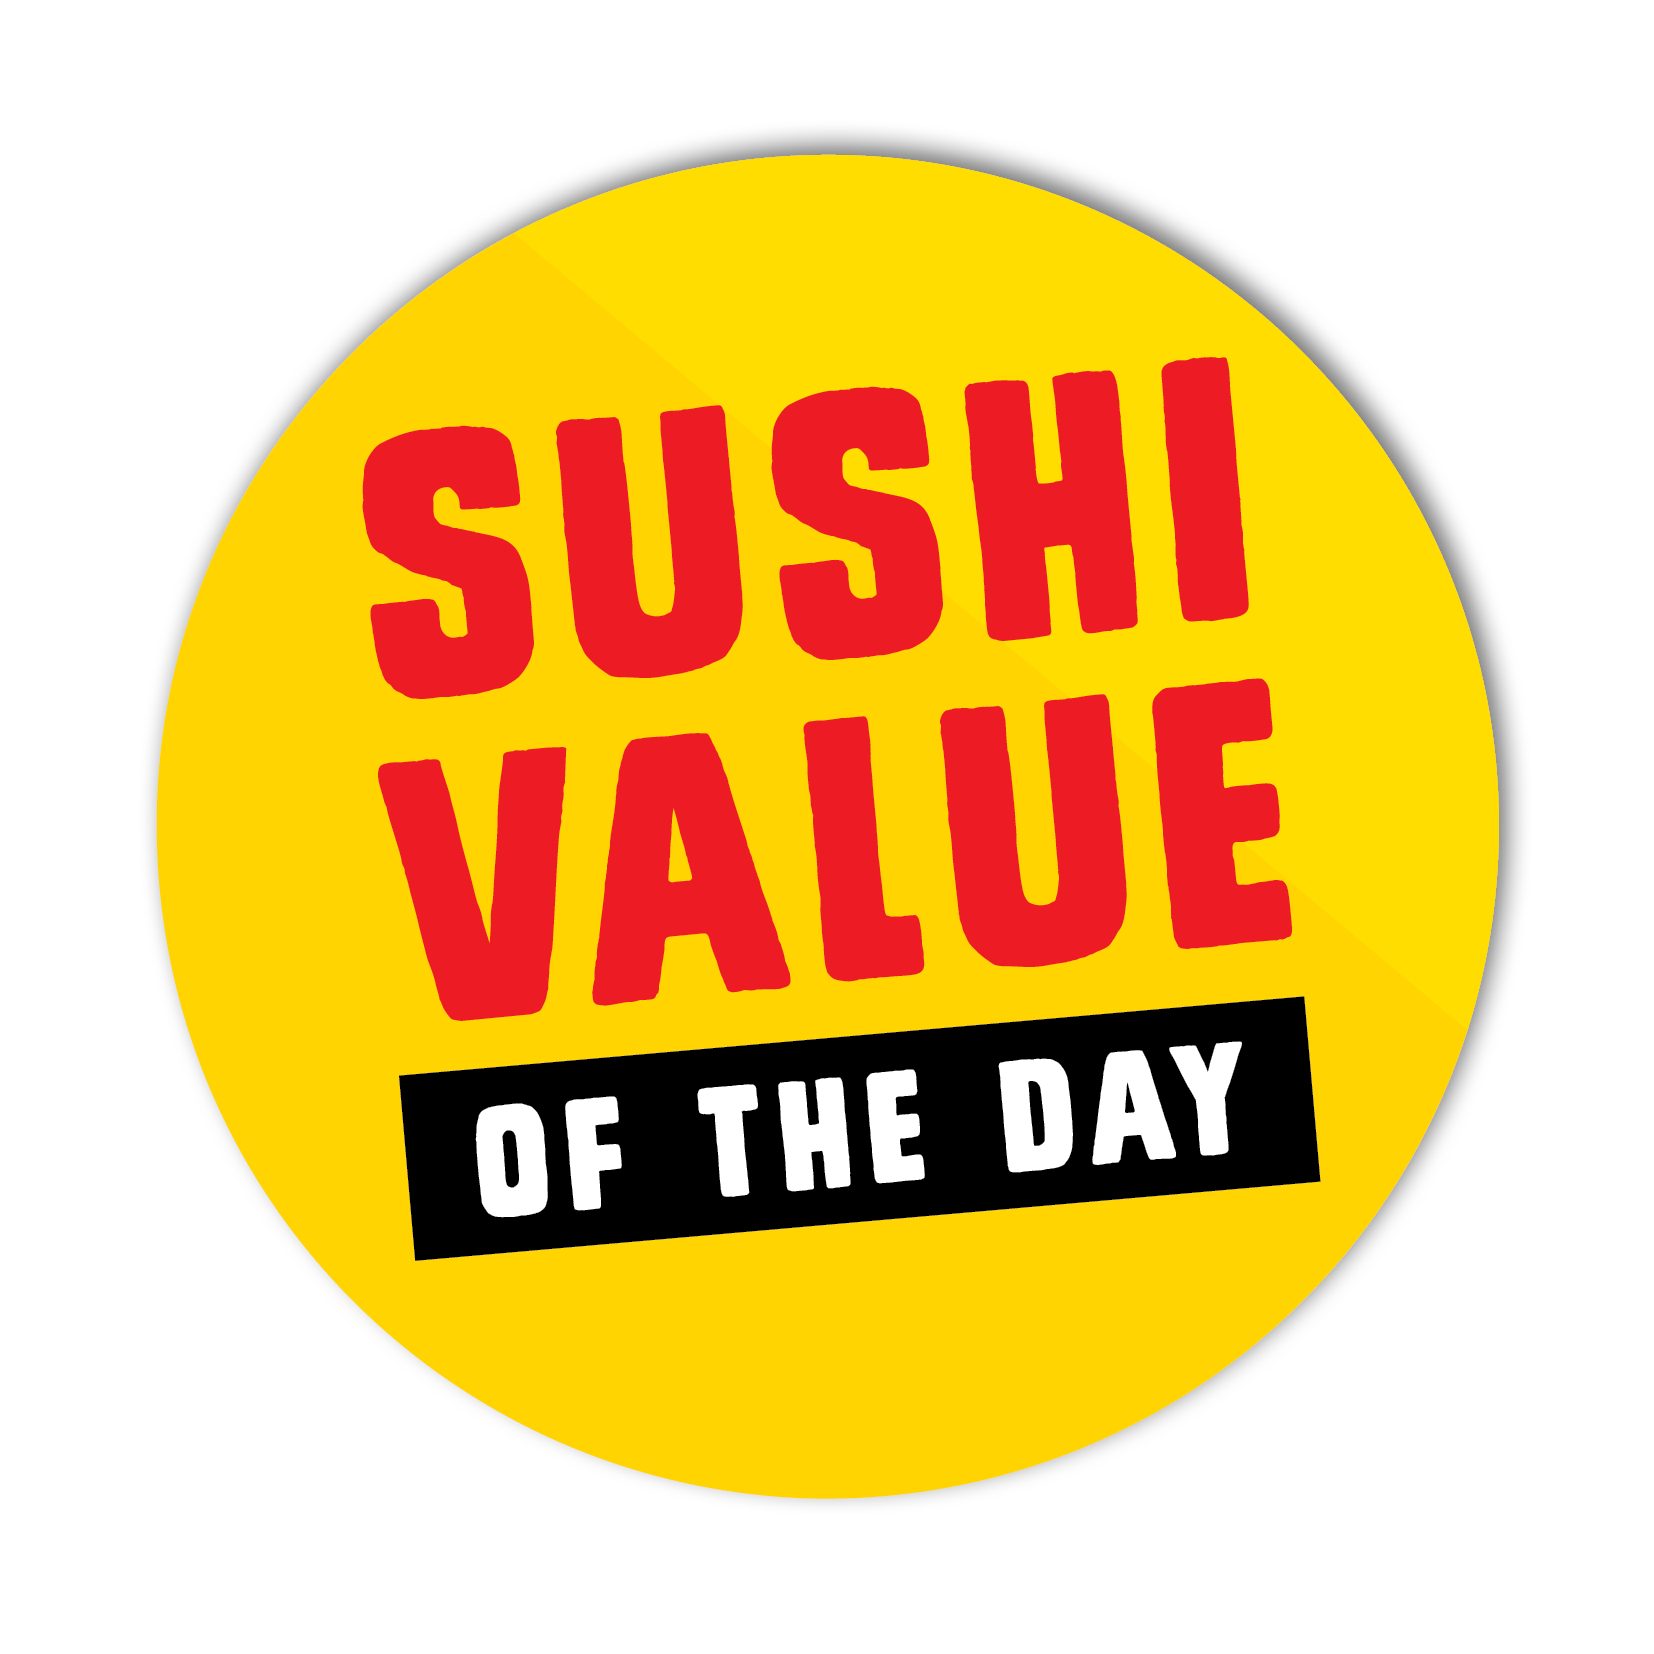 Value of The Day